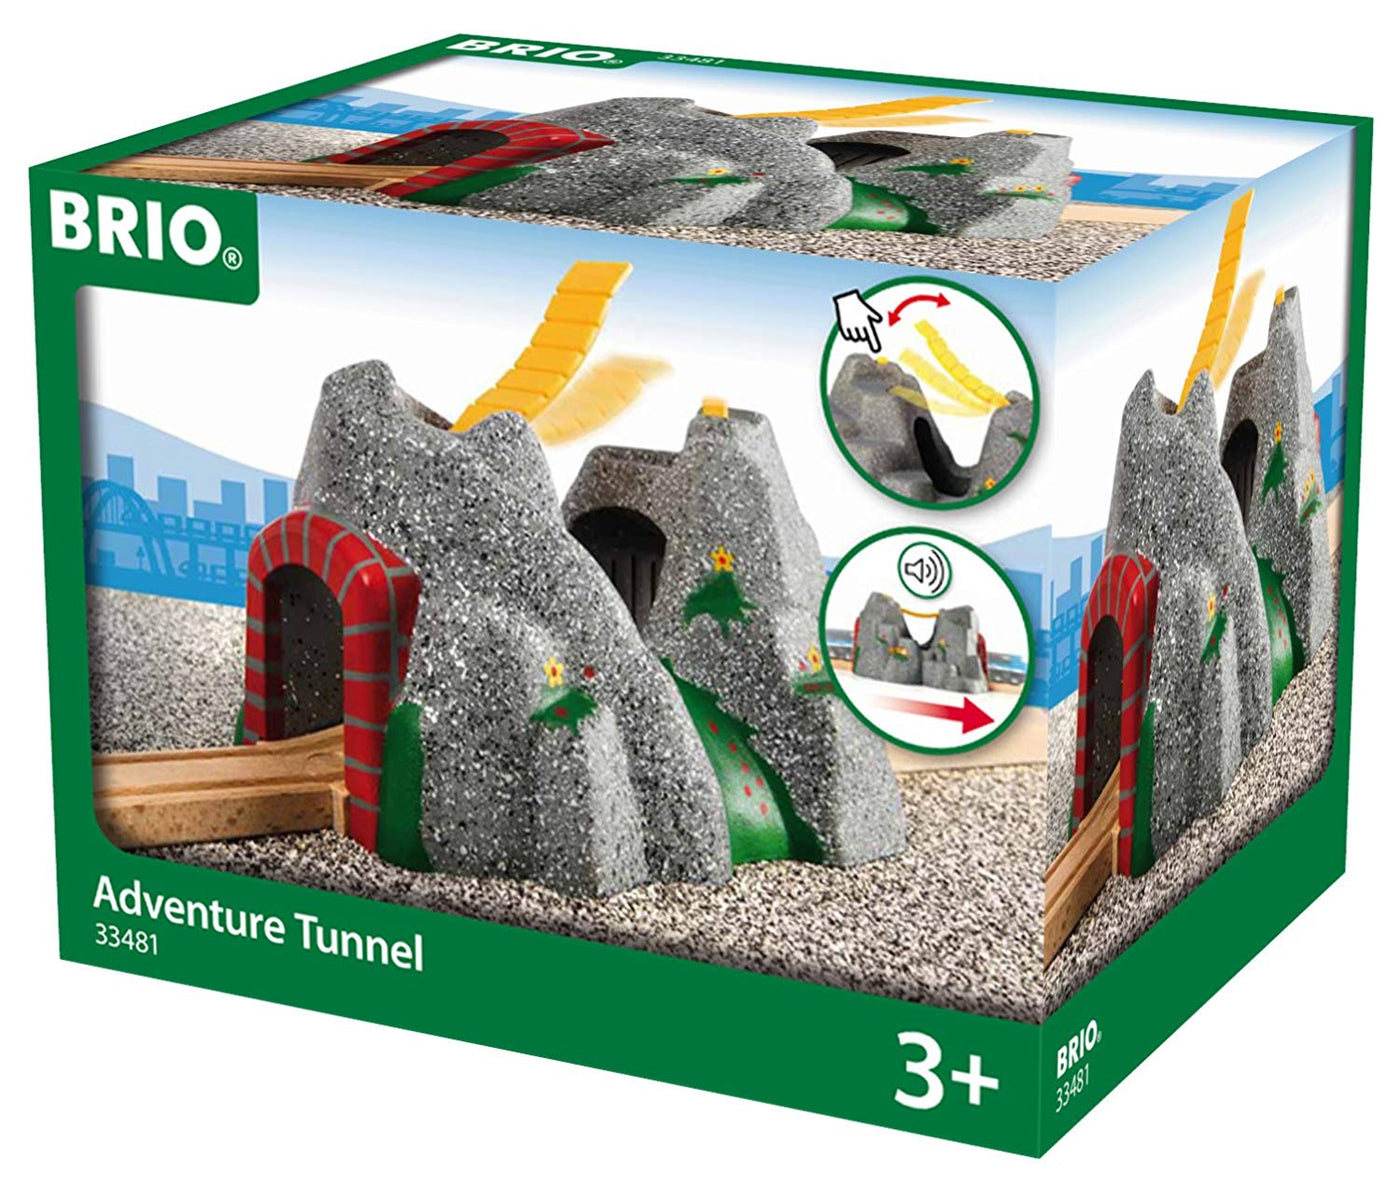 BRIO Smart Tech Sound Action Tunnel Deluxe Set - Teaching Toys and Books